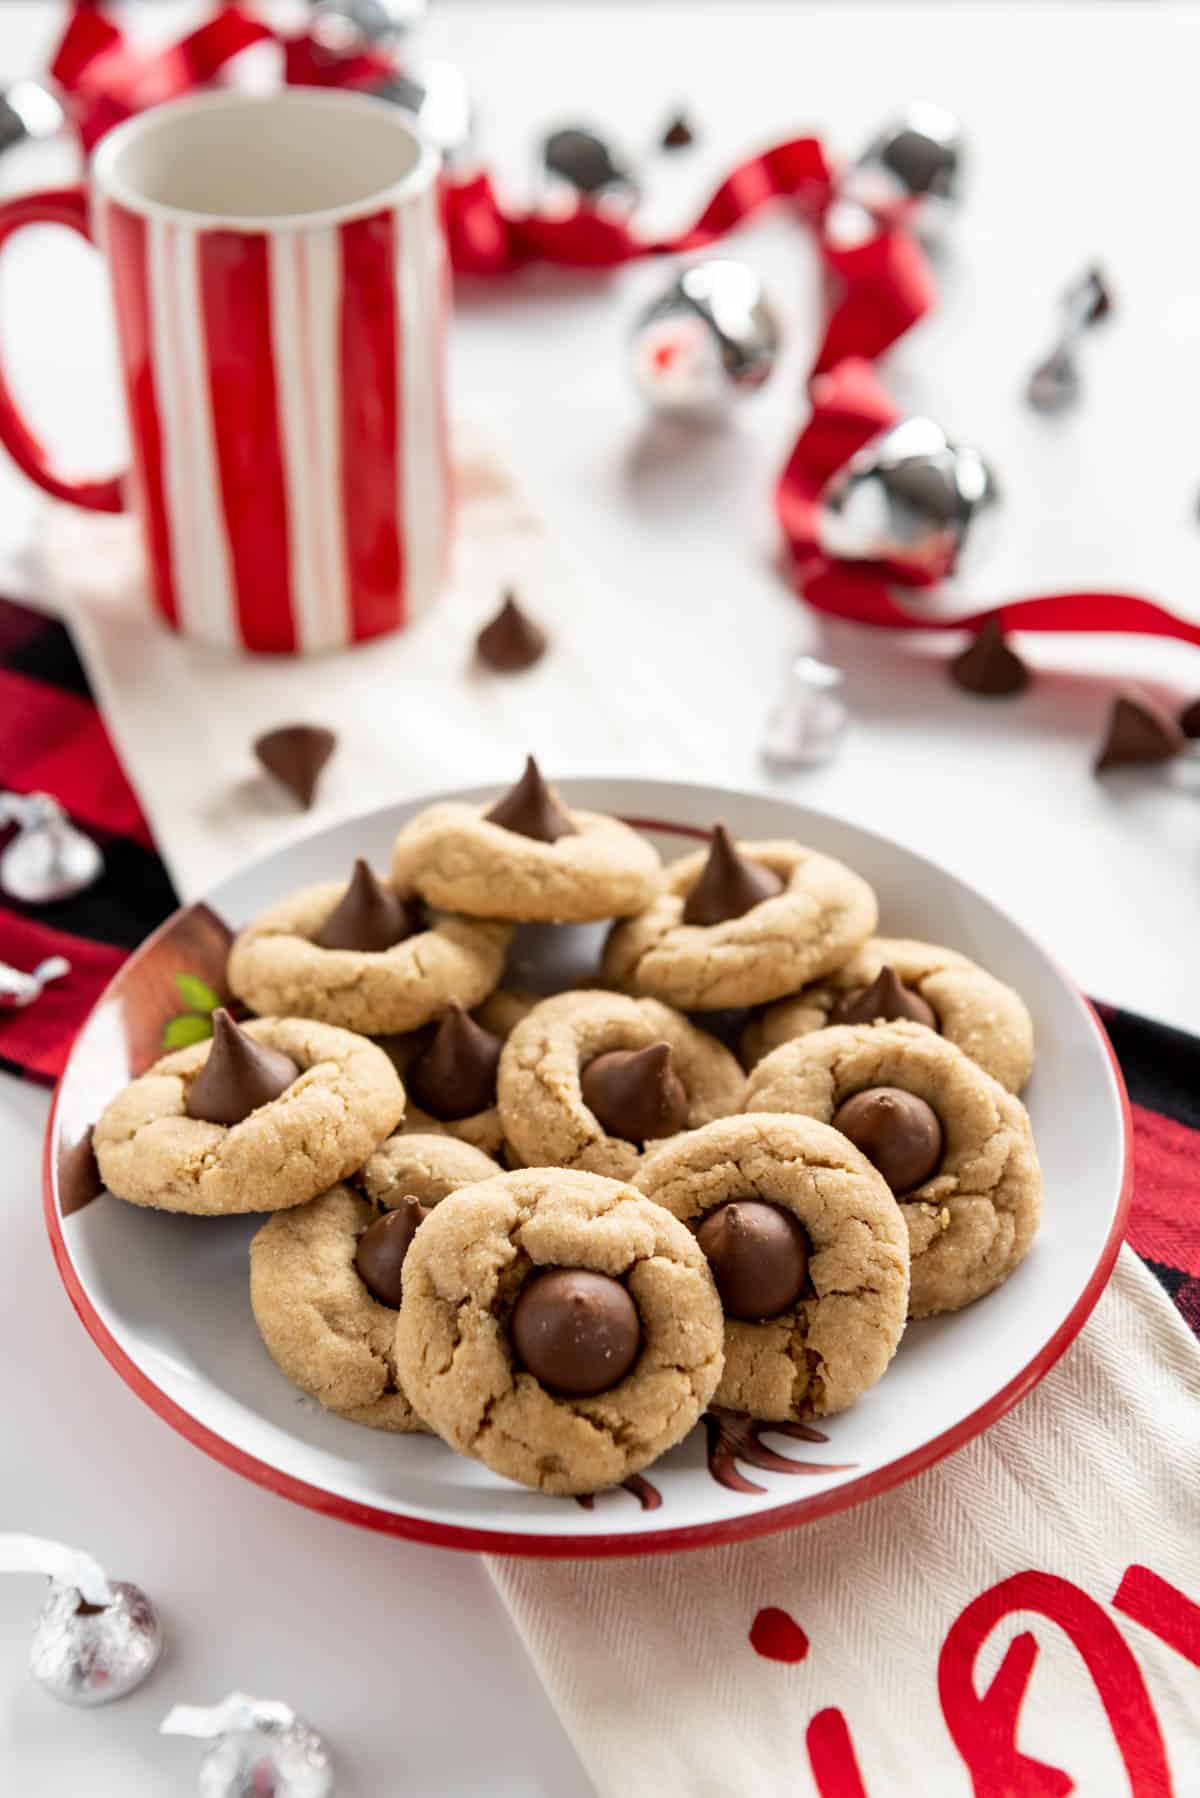 A plate full of peanut butter blossom cookies on a table with red and white decorations and mugs around it and some Hershey kisses both wrapped and unwrapped scattered on the table.